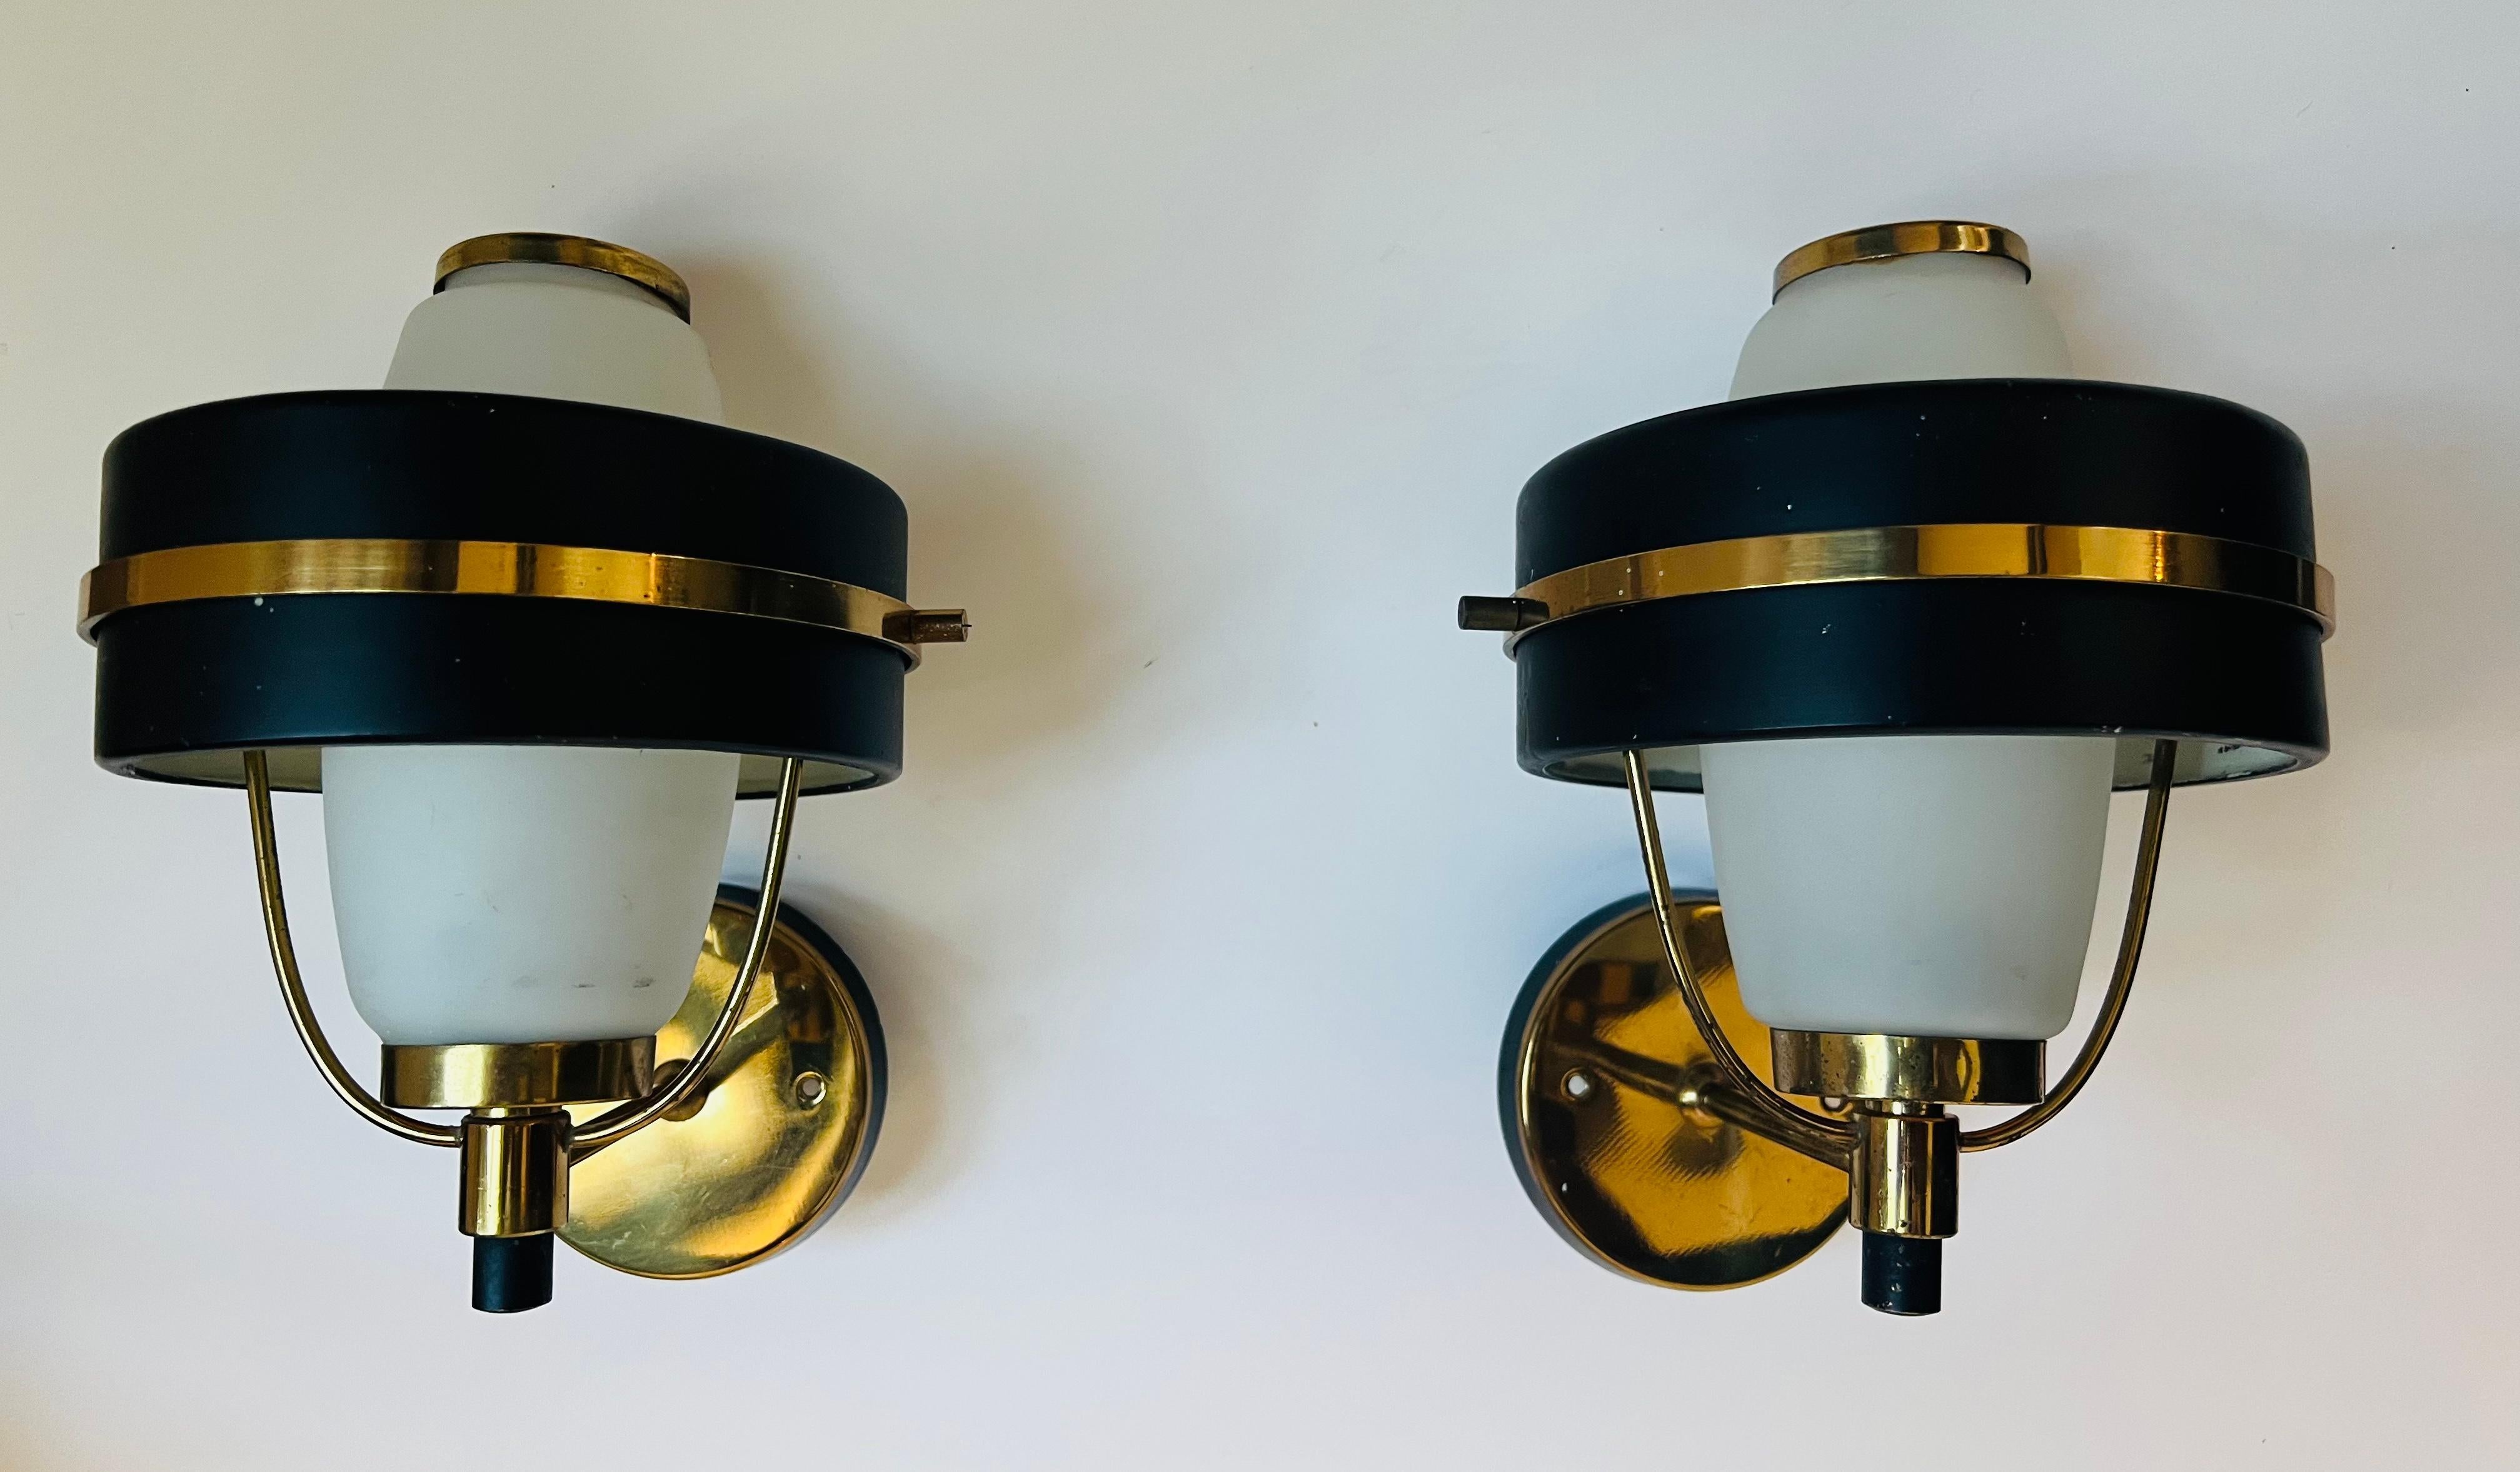 An original pair of 1950s Italian mid century sconces in golden polished brass and black enamel with white frosted glass shades. Rewired. One 120 watt candelabra socket each. Made by Stilnovo.